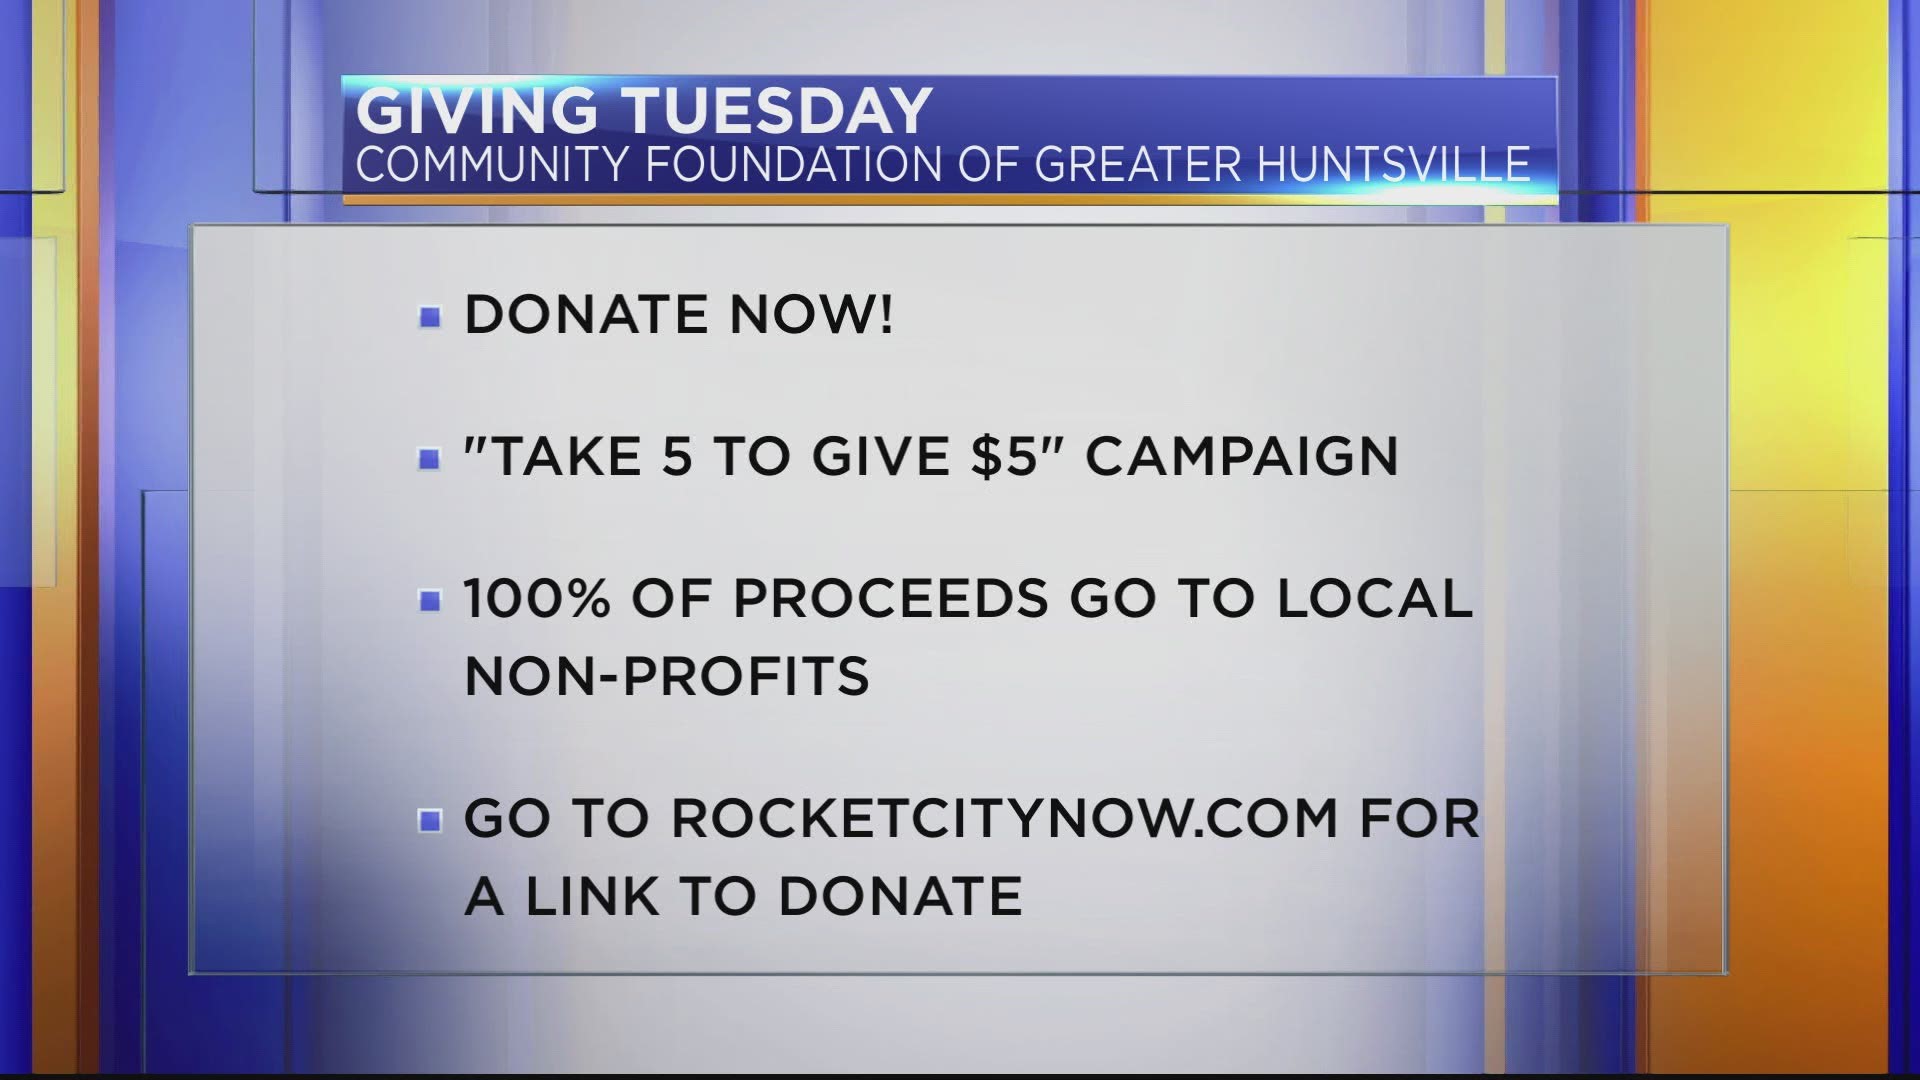 Give on #GivingTuesday to help others in your community.